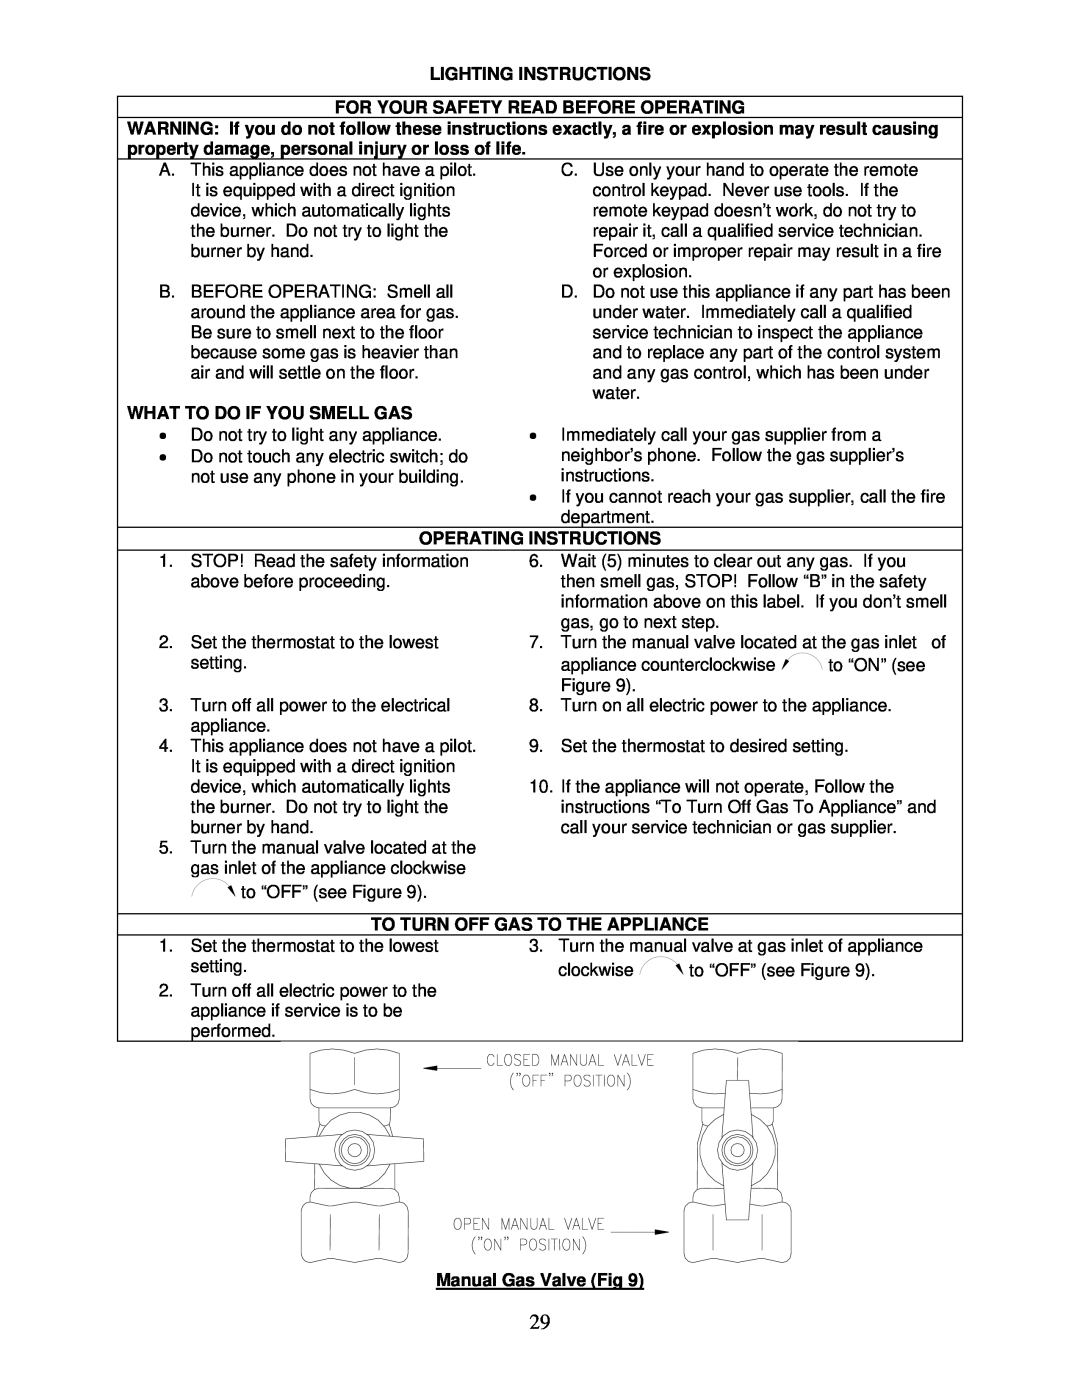 Bradford-White Corp IGE-199C Series Operating Instructions, To Turn Off Gas To The Appliance, Manual Gas Valve Fig 